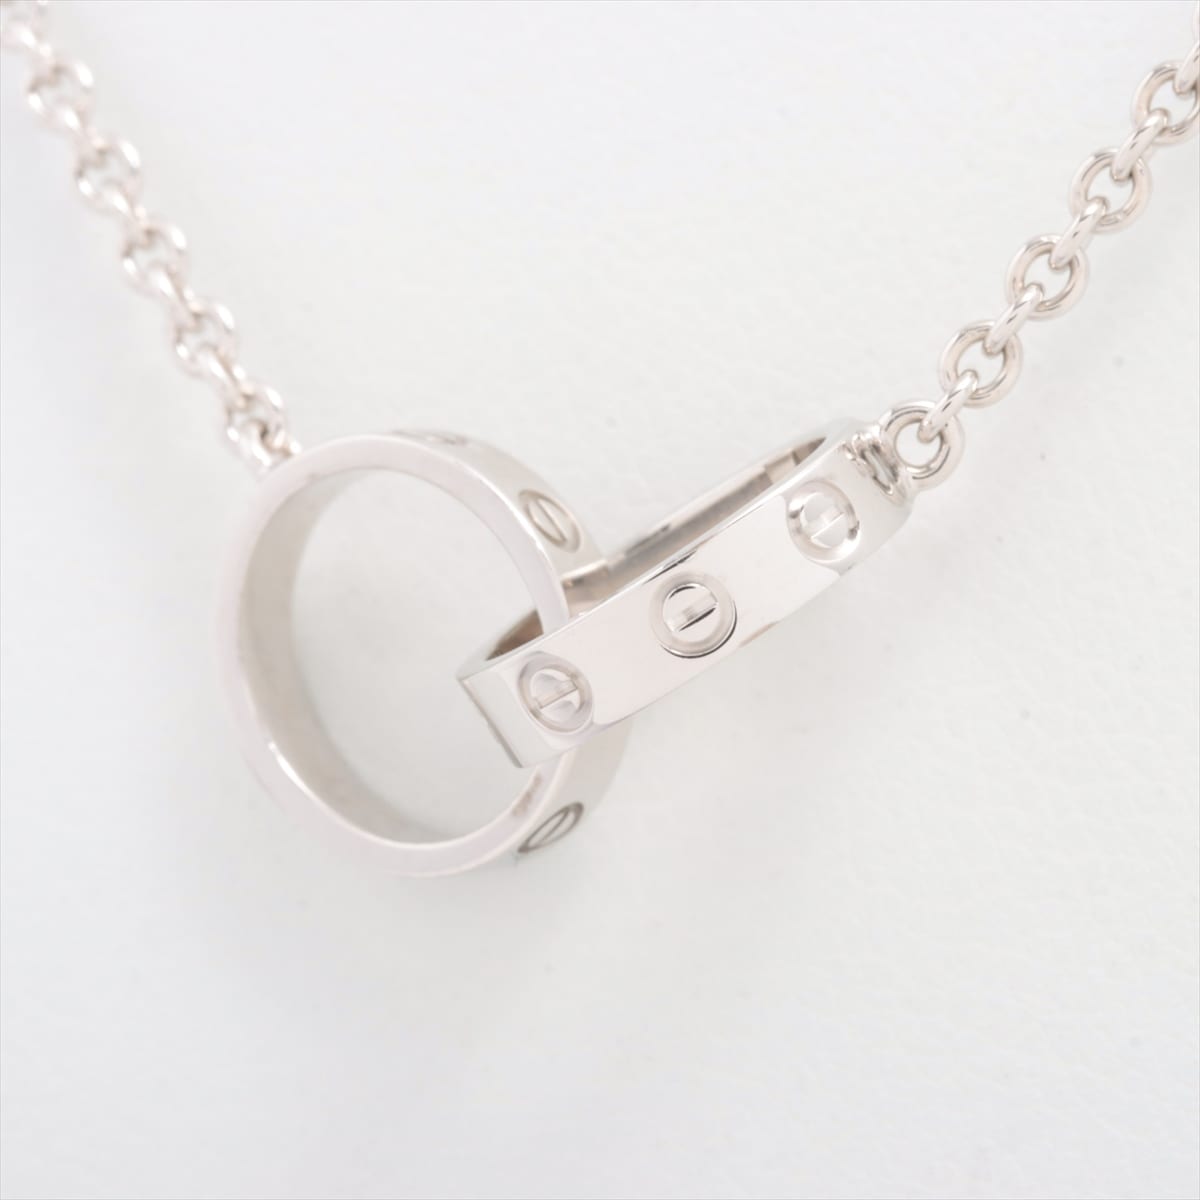 Cartier Baby Love Necklace 750(WG) 7.3g